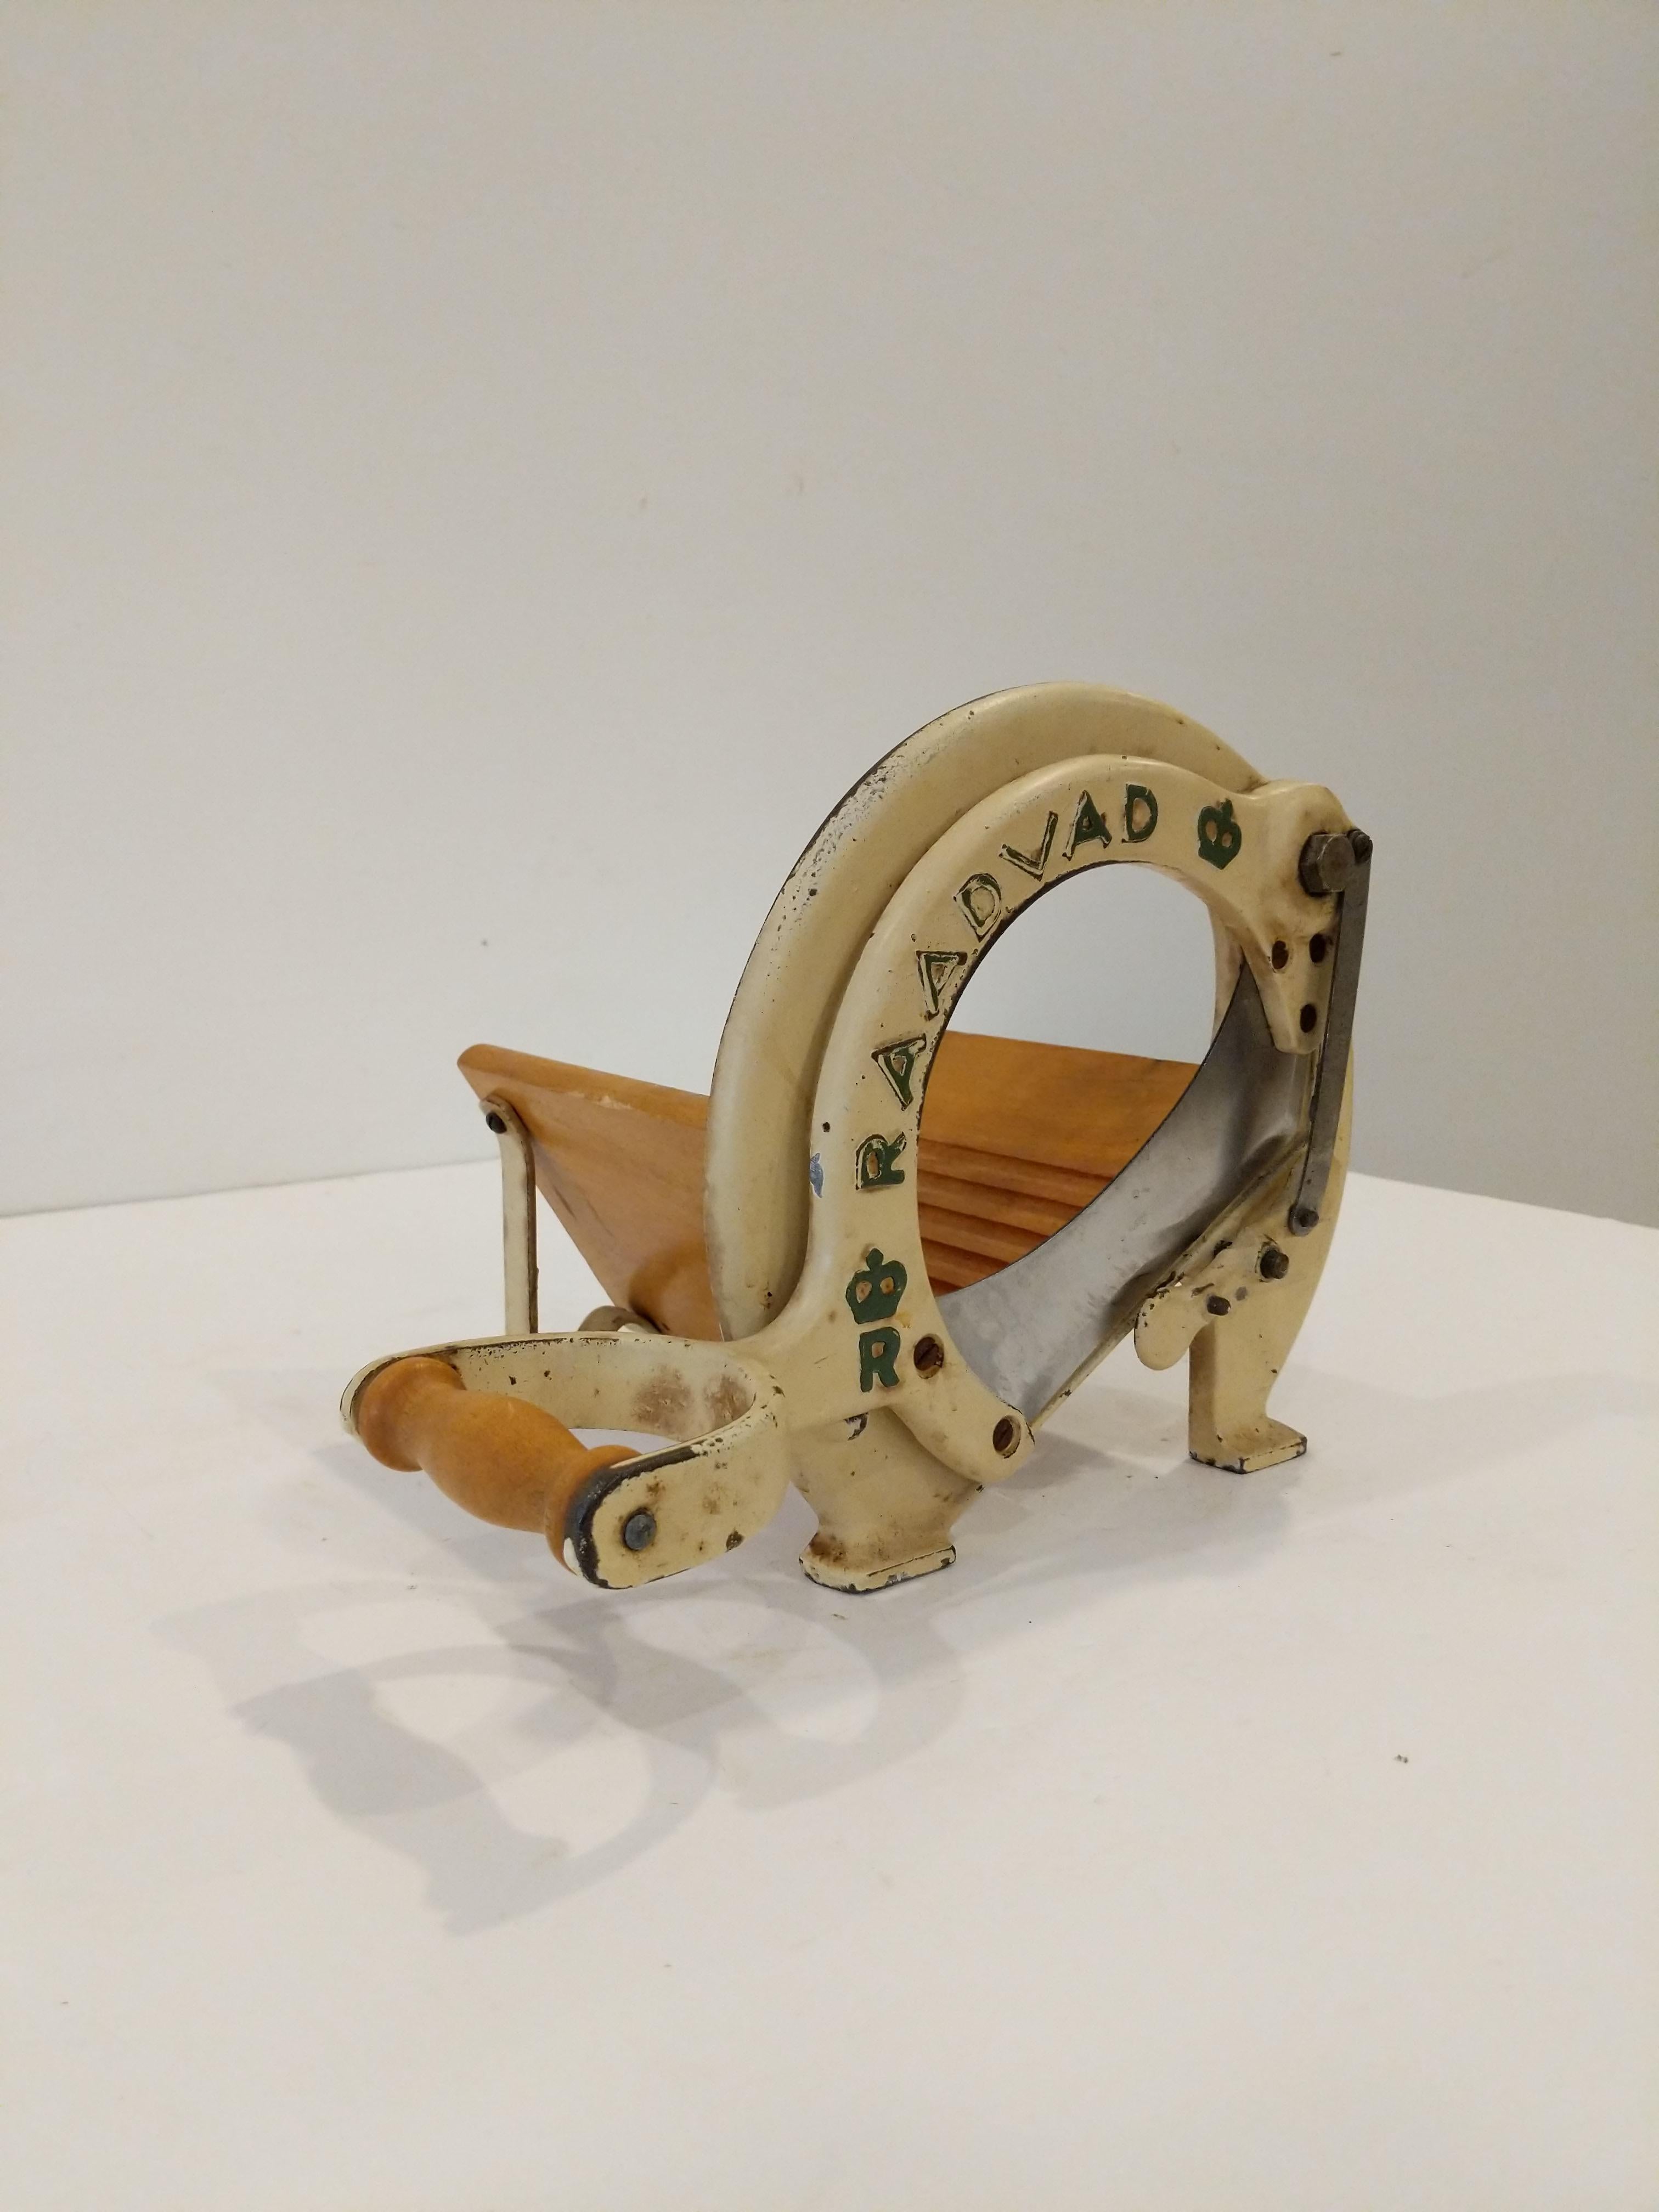 Authentic vintage Danish bread slicer / guillotine in cream.

Model 294 by Raadvad.

This slicer is in good condition overall and expectedly shows its age a bit.

Dimensions:
13.5” Long including handle
9.5” Tall
8” Wide

Ref: RV27-030-2